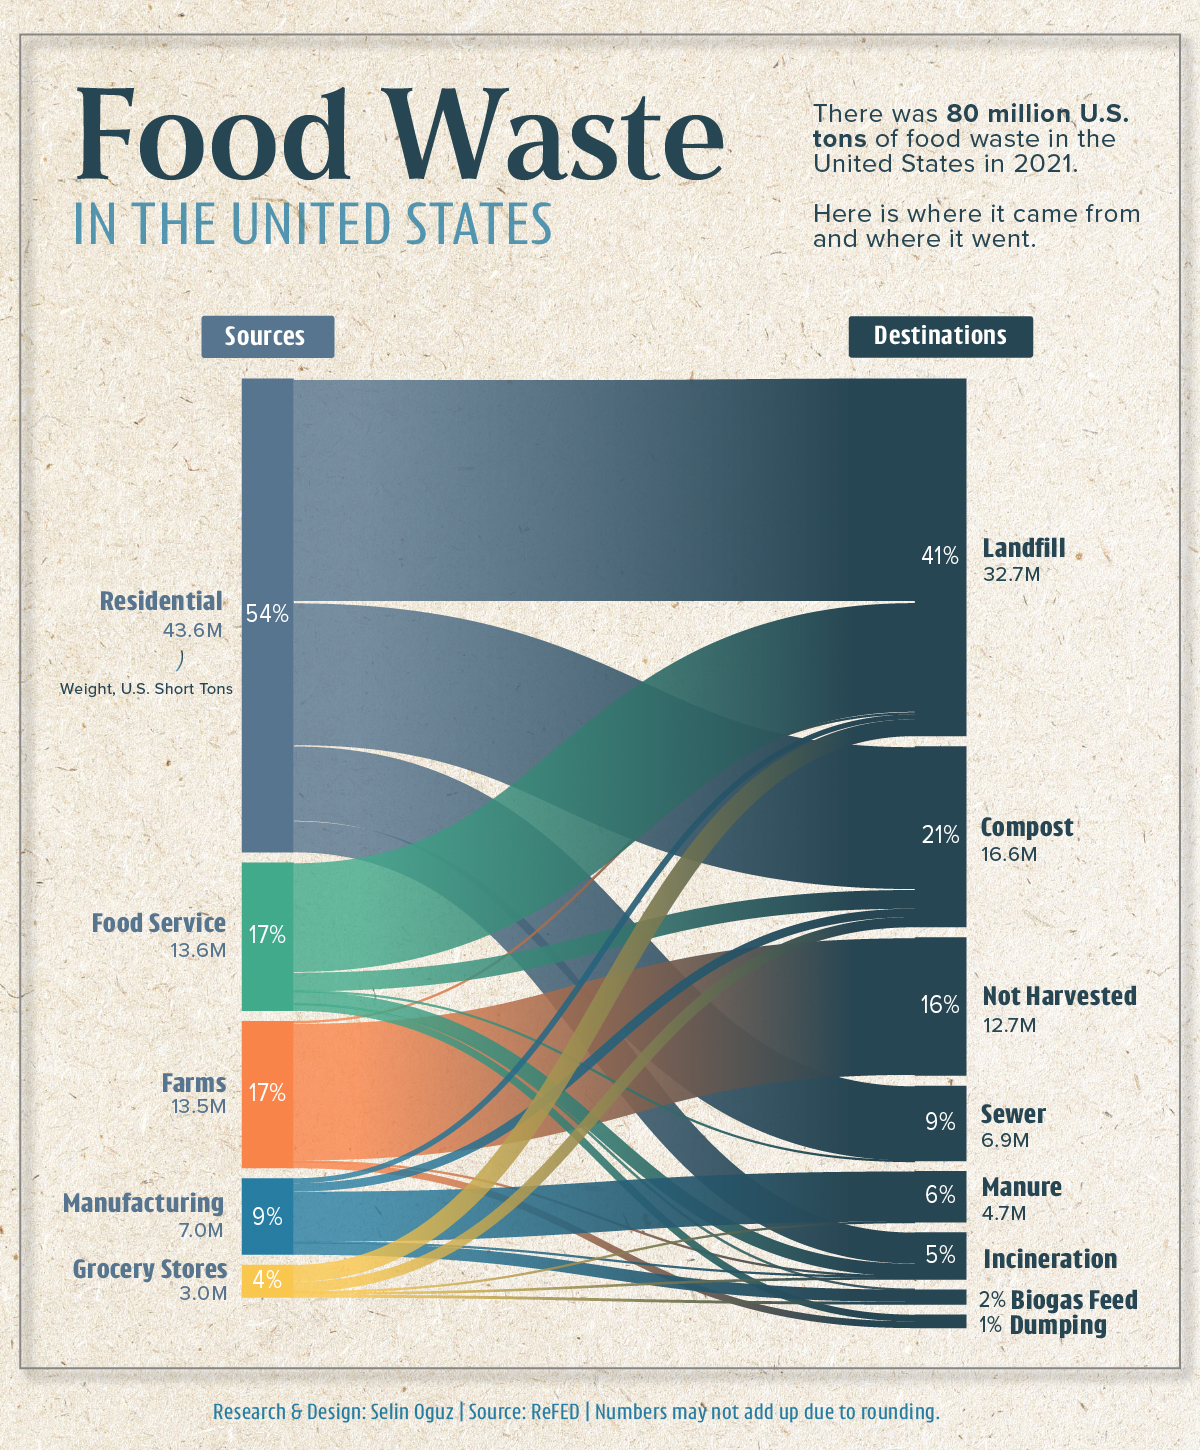 Visualized: Food Waste in the United States